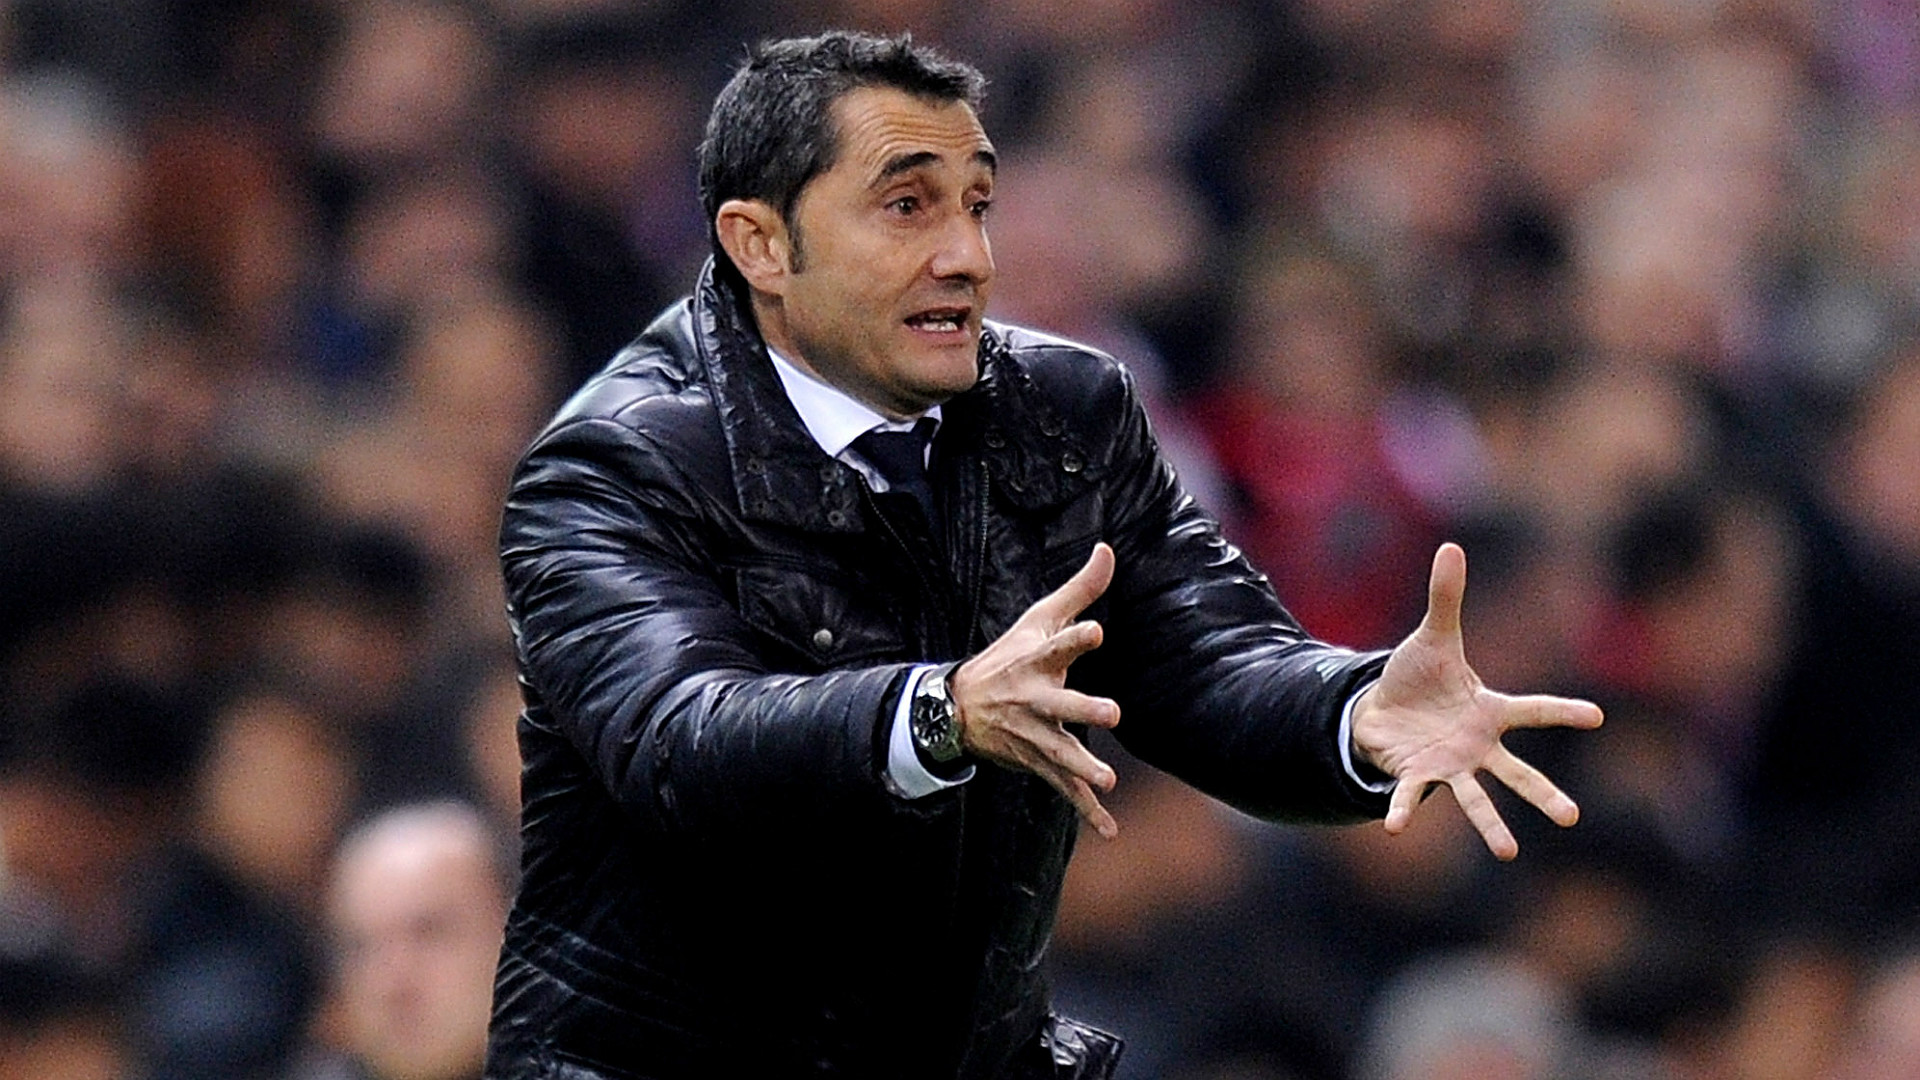 Valverde leading the race to be next Barca boss  English Bahrain